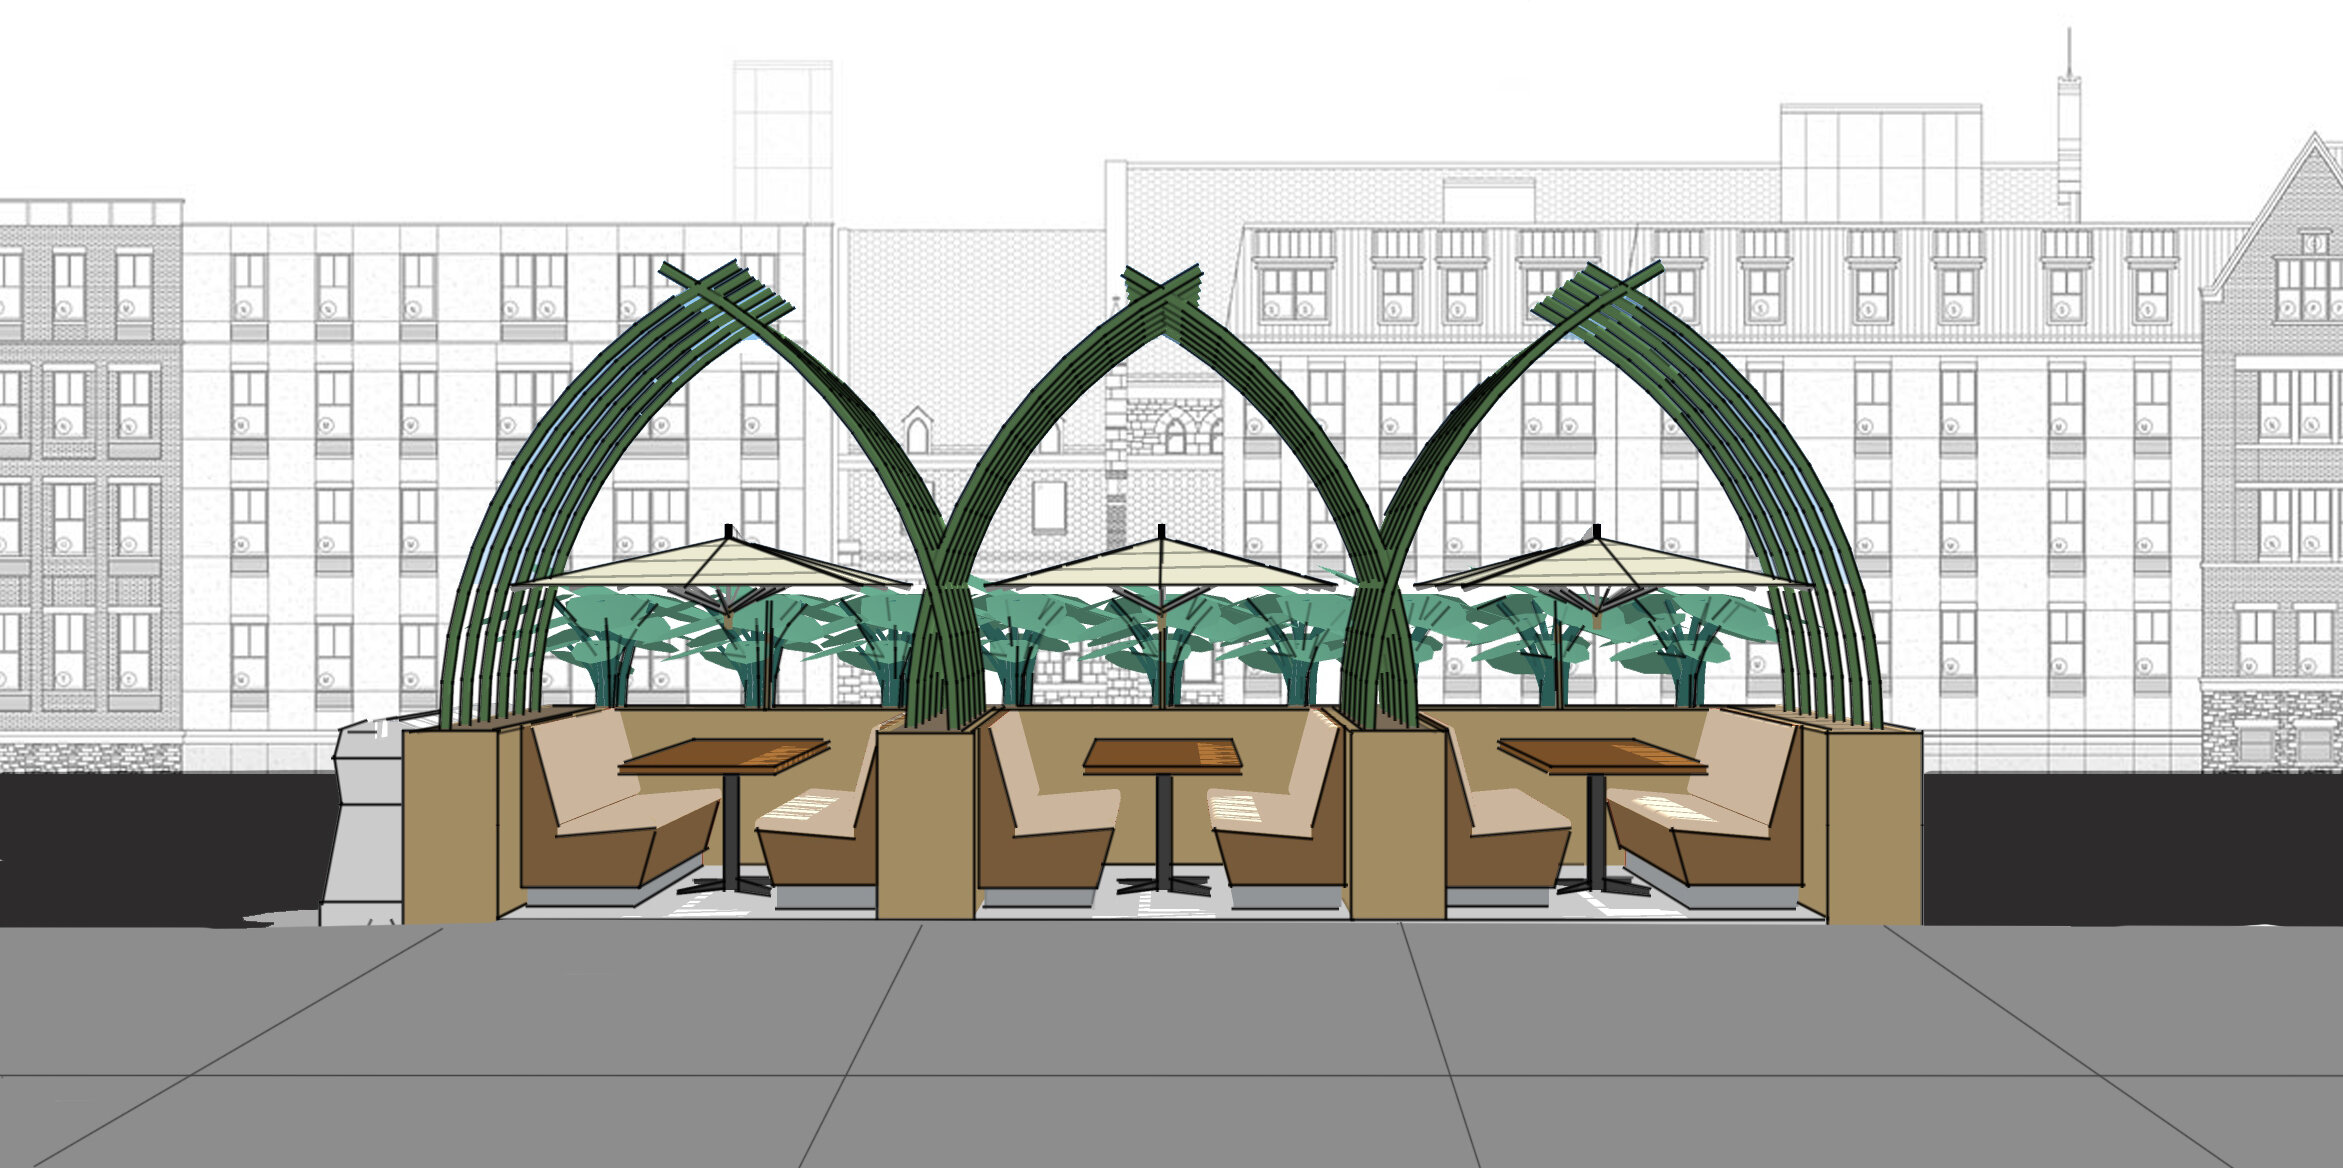  In an available roadside parking space, an outdoor restaurant seating area is designed to utilize limited space without compromising design. The living willow structure and booth seating are meant to separate patrons without eliminating the social a